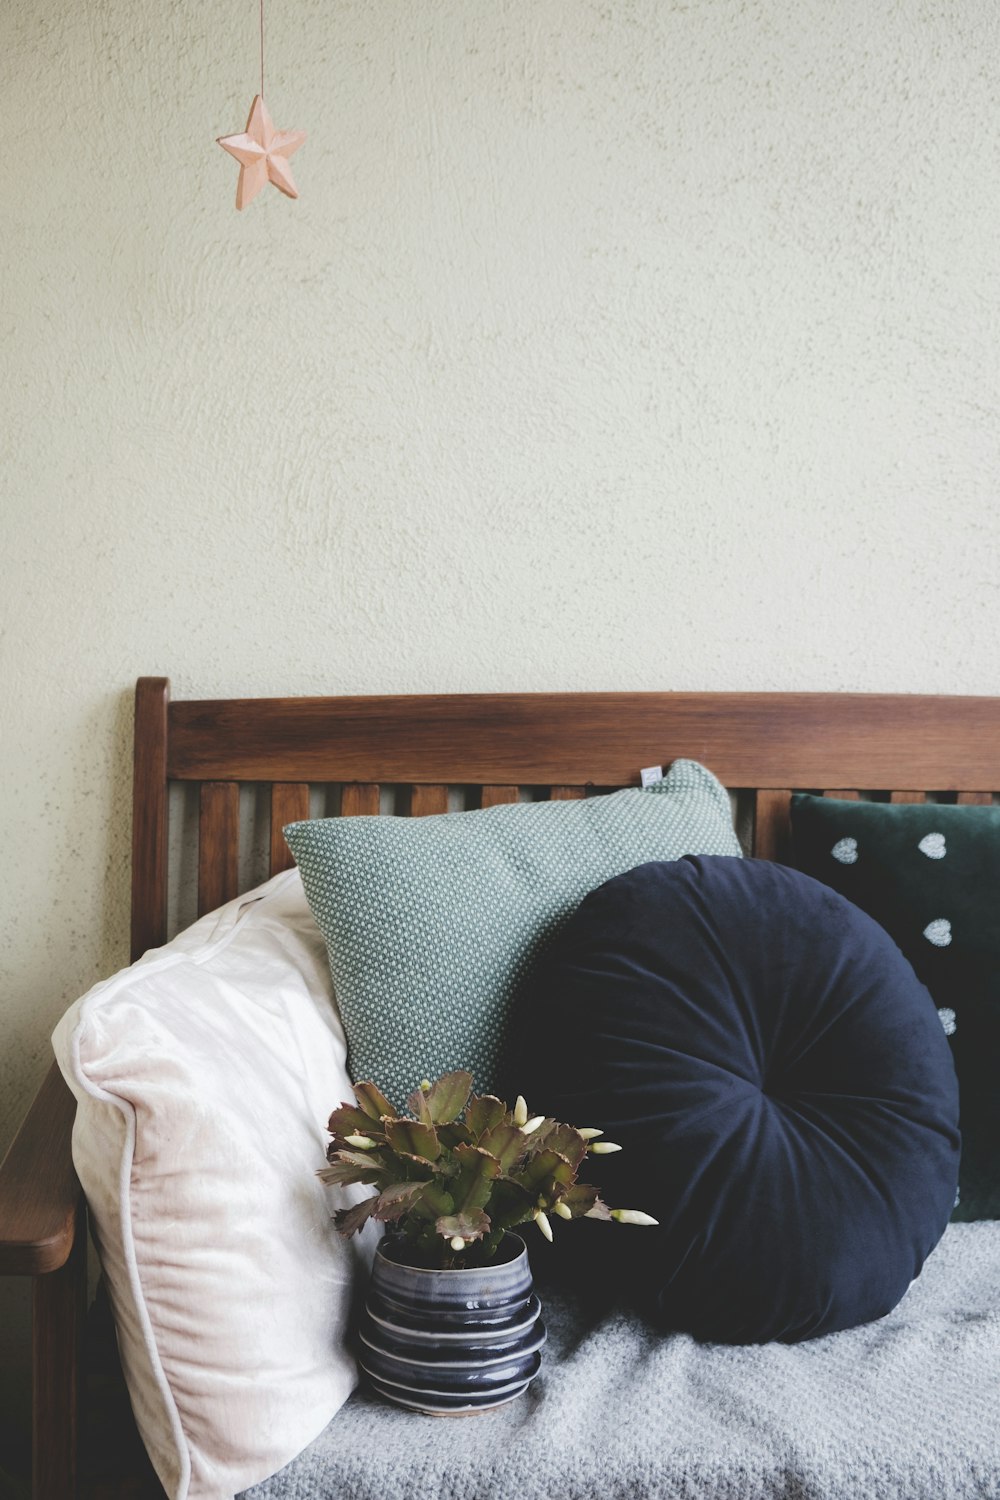 500+ Pillow Pictures [HD]  Download Free Images on Unsplash